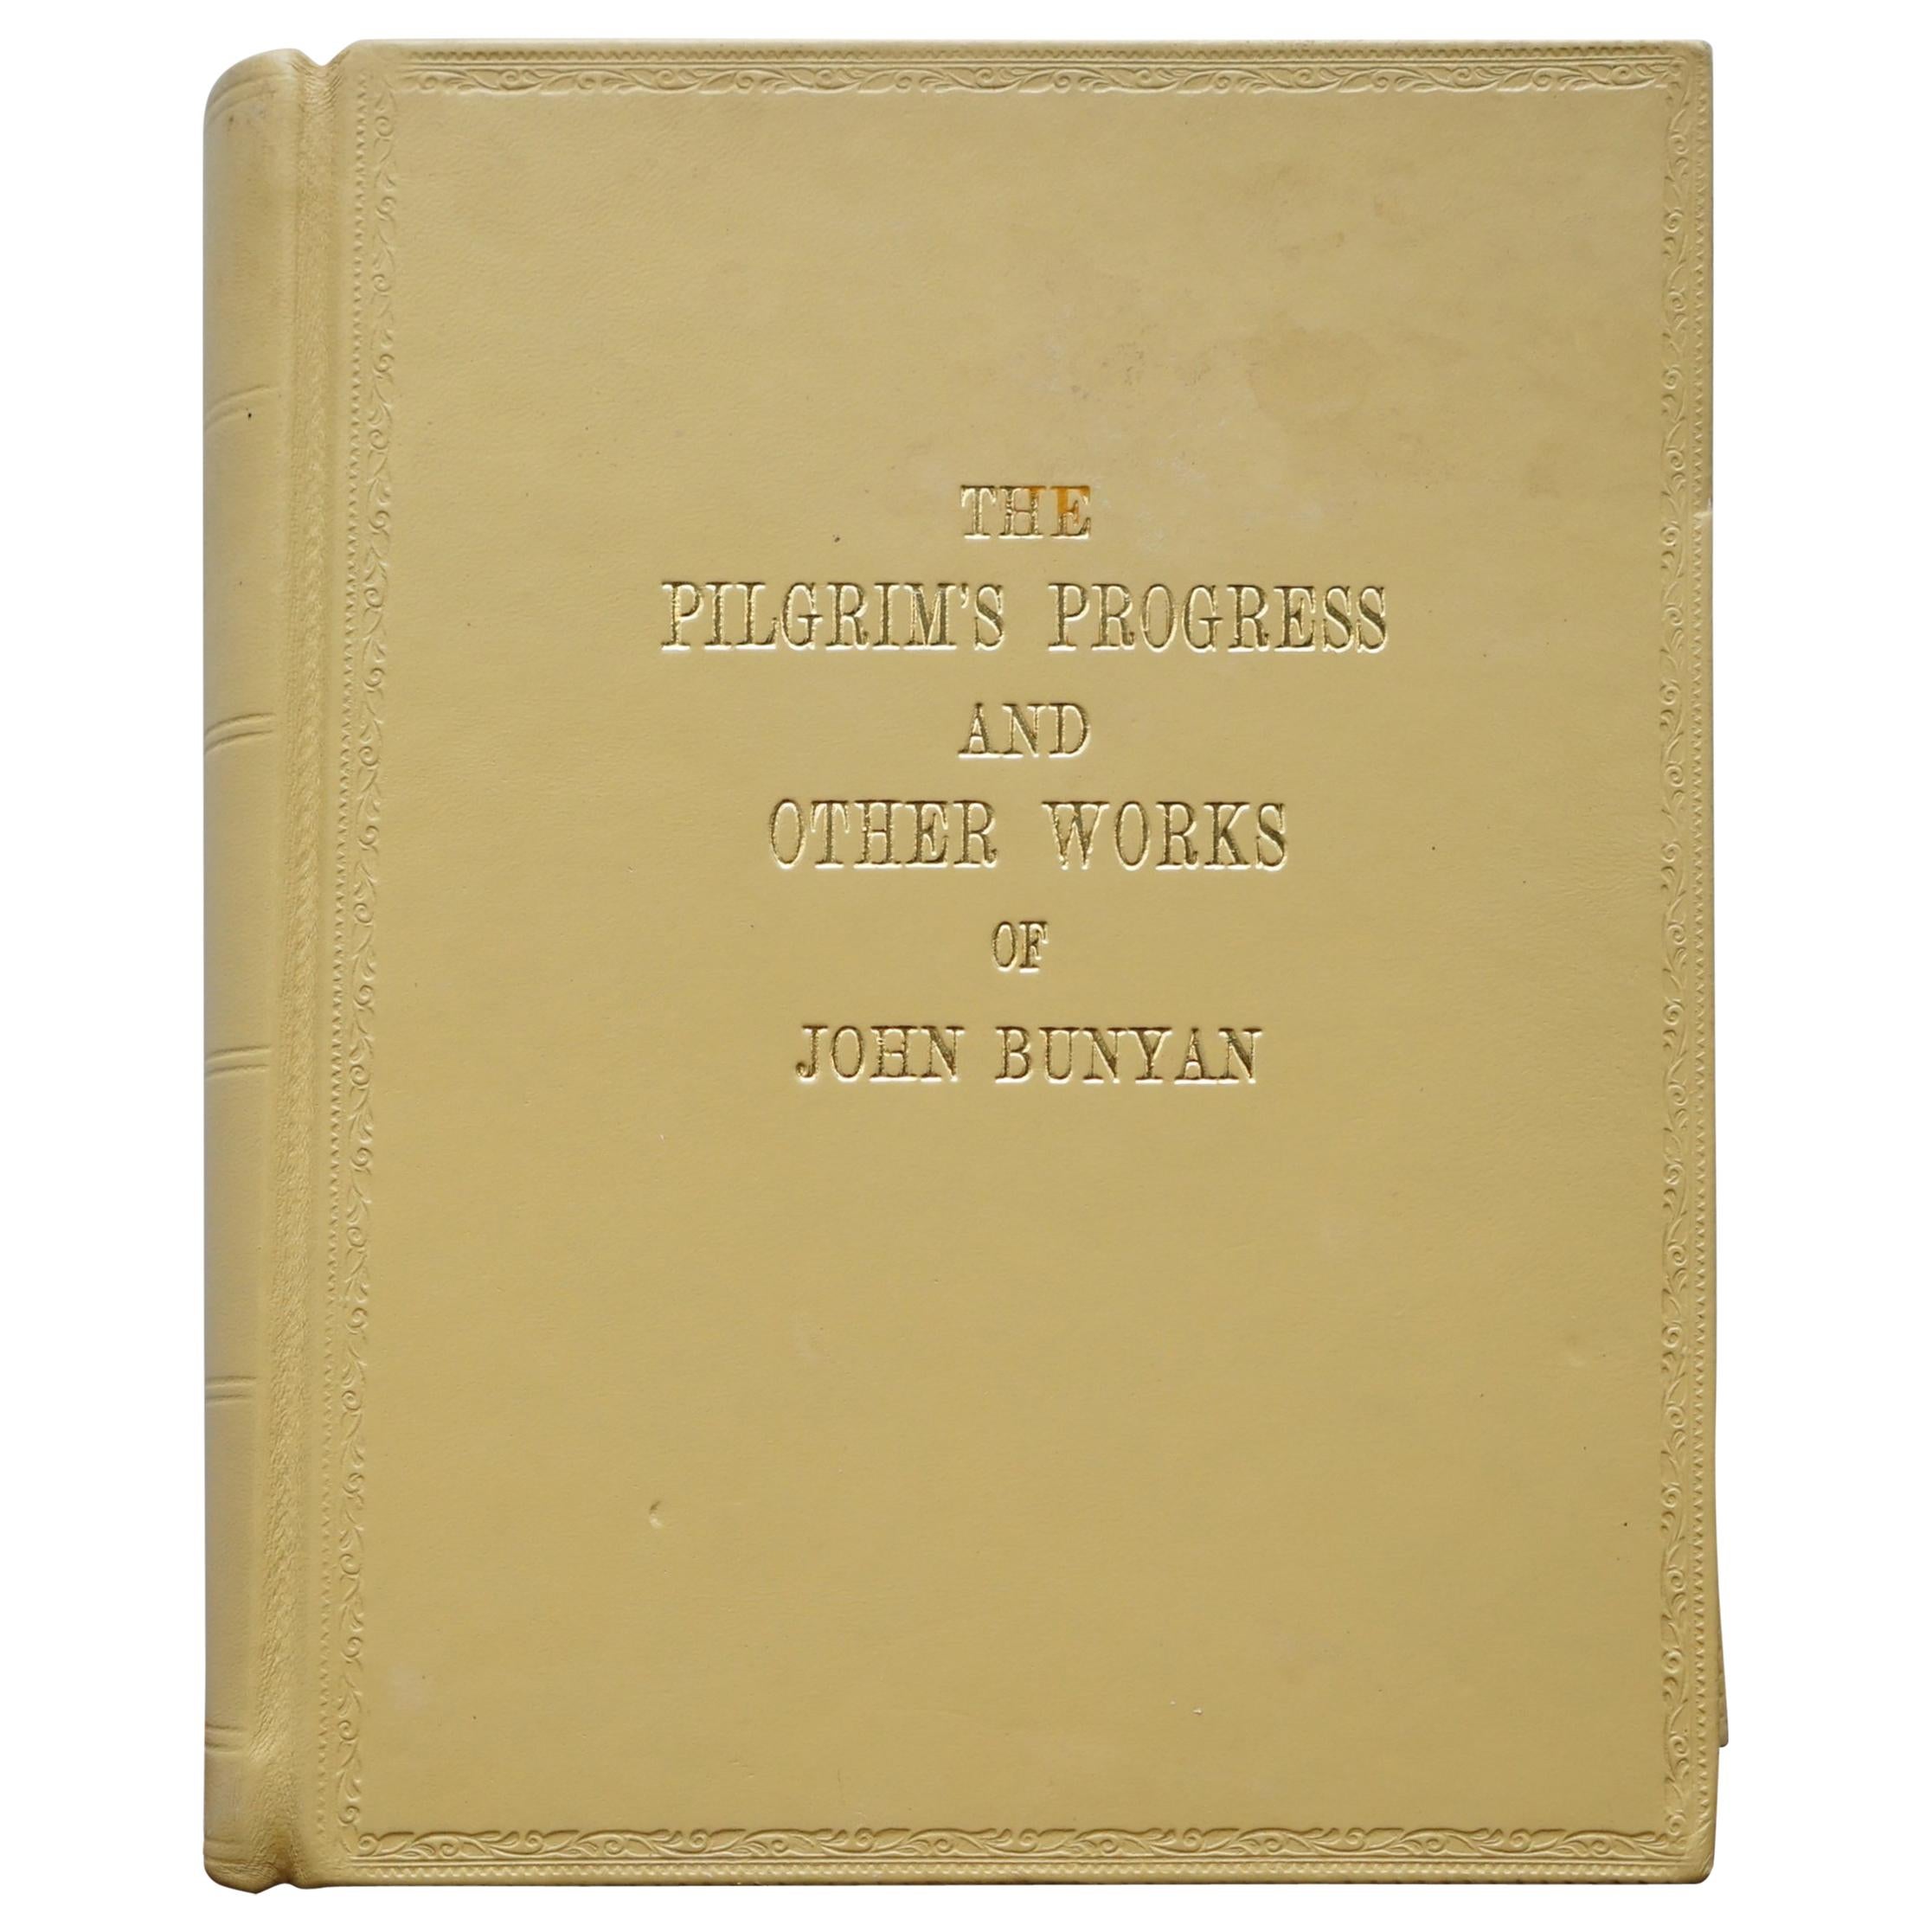 Rare 1872 Edition of the Pilgrim's Progress and Other Works of John Bunyan For Sale